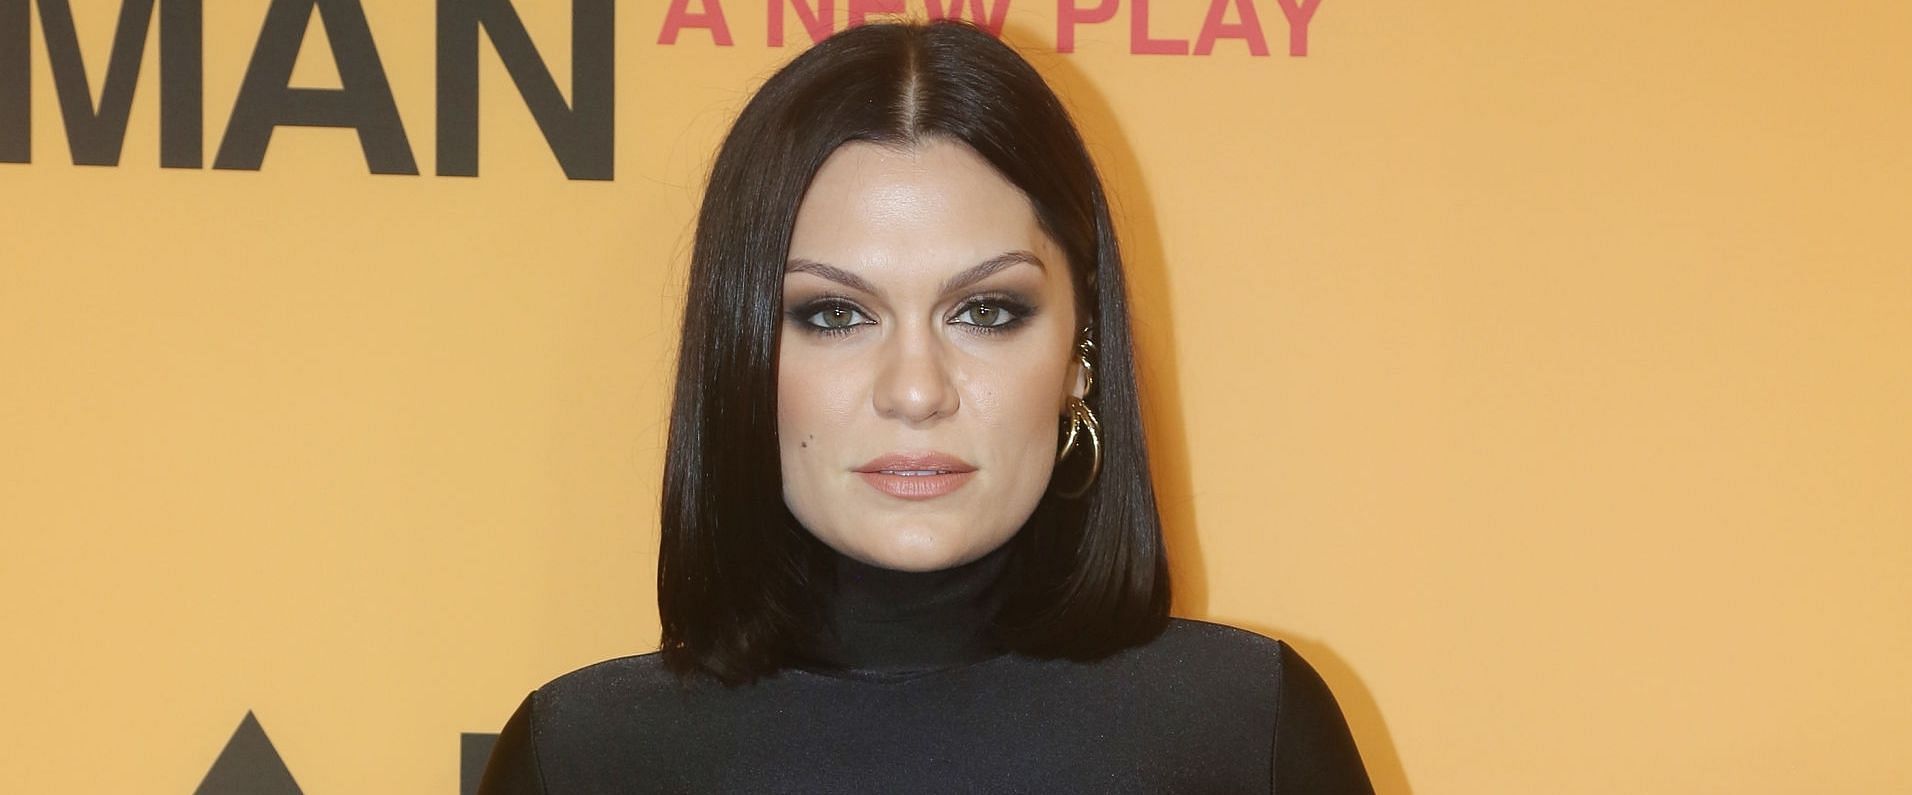 Singer Jessie J suffered a tragic pregnancy loss on Tuesday (Image via Getty Images/Bruce Glikas)